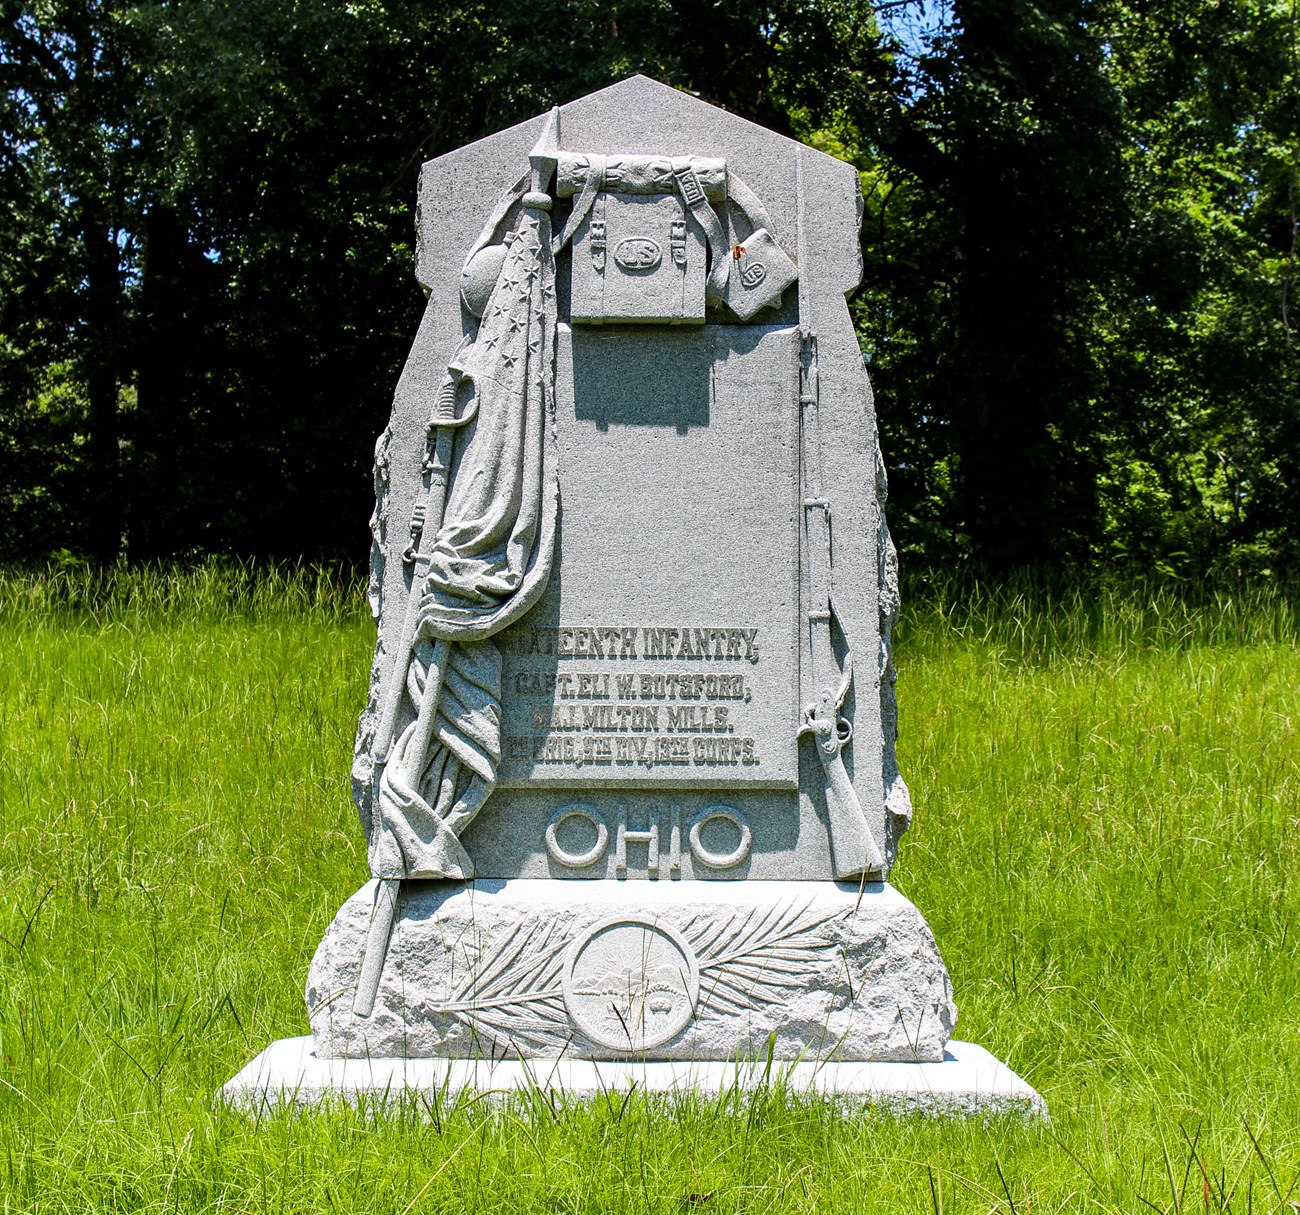 A stone monument with a military bag and supplies carved into it. Ohio carved largely on the top of the monument